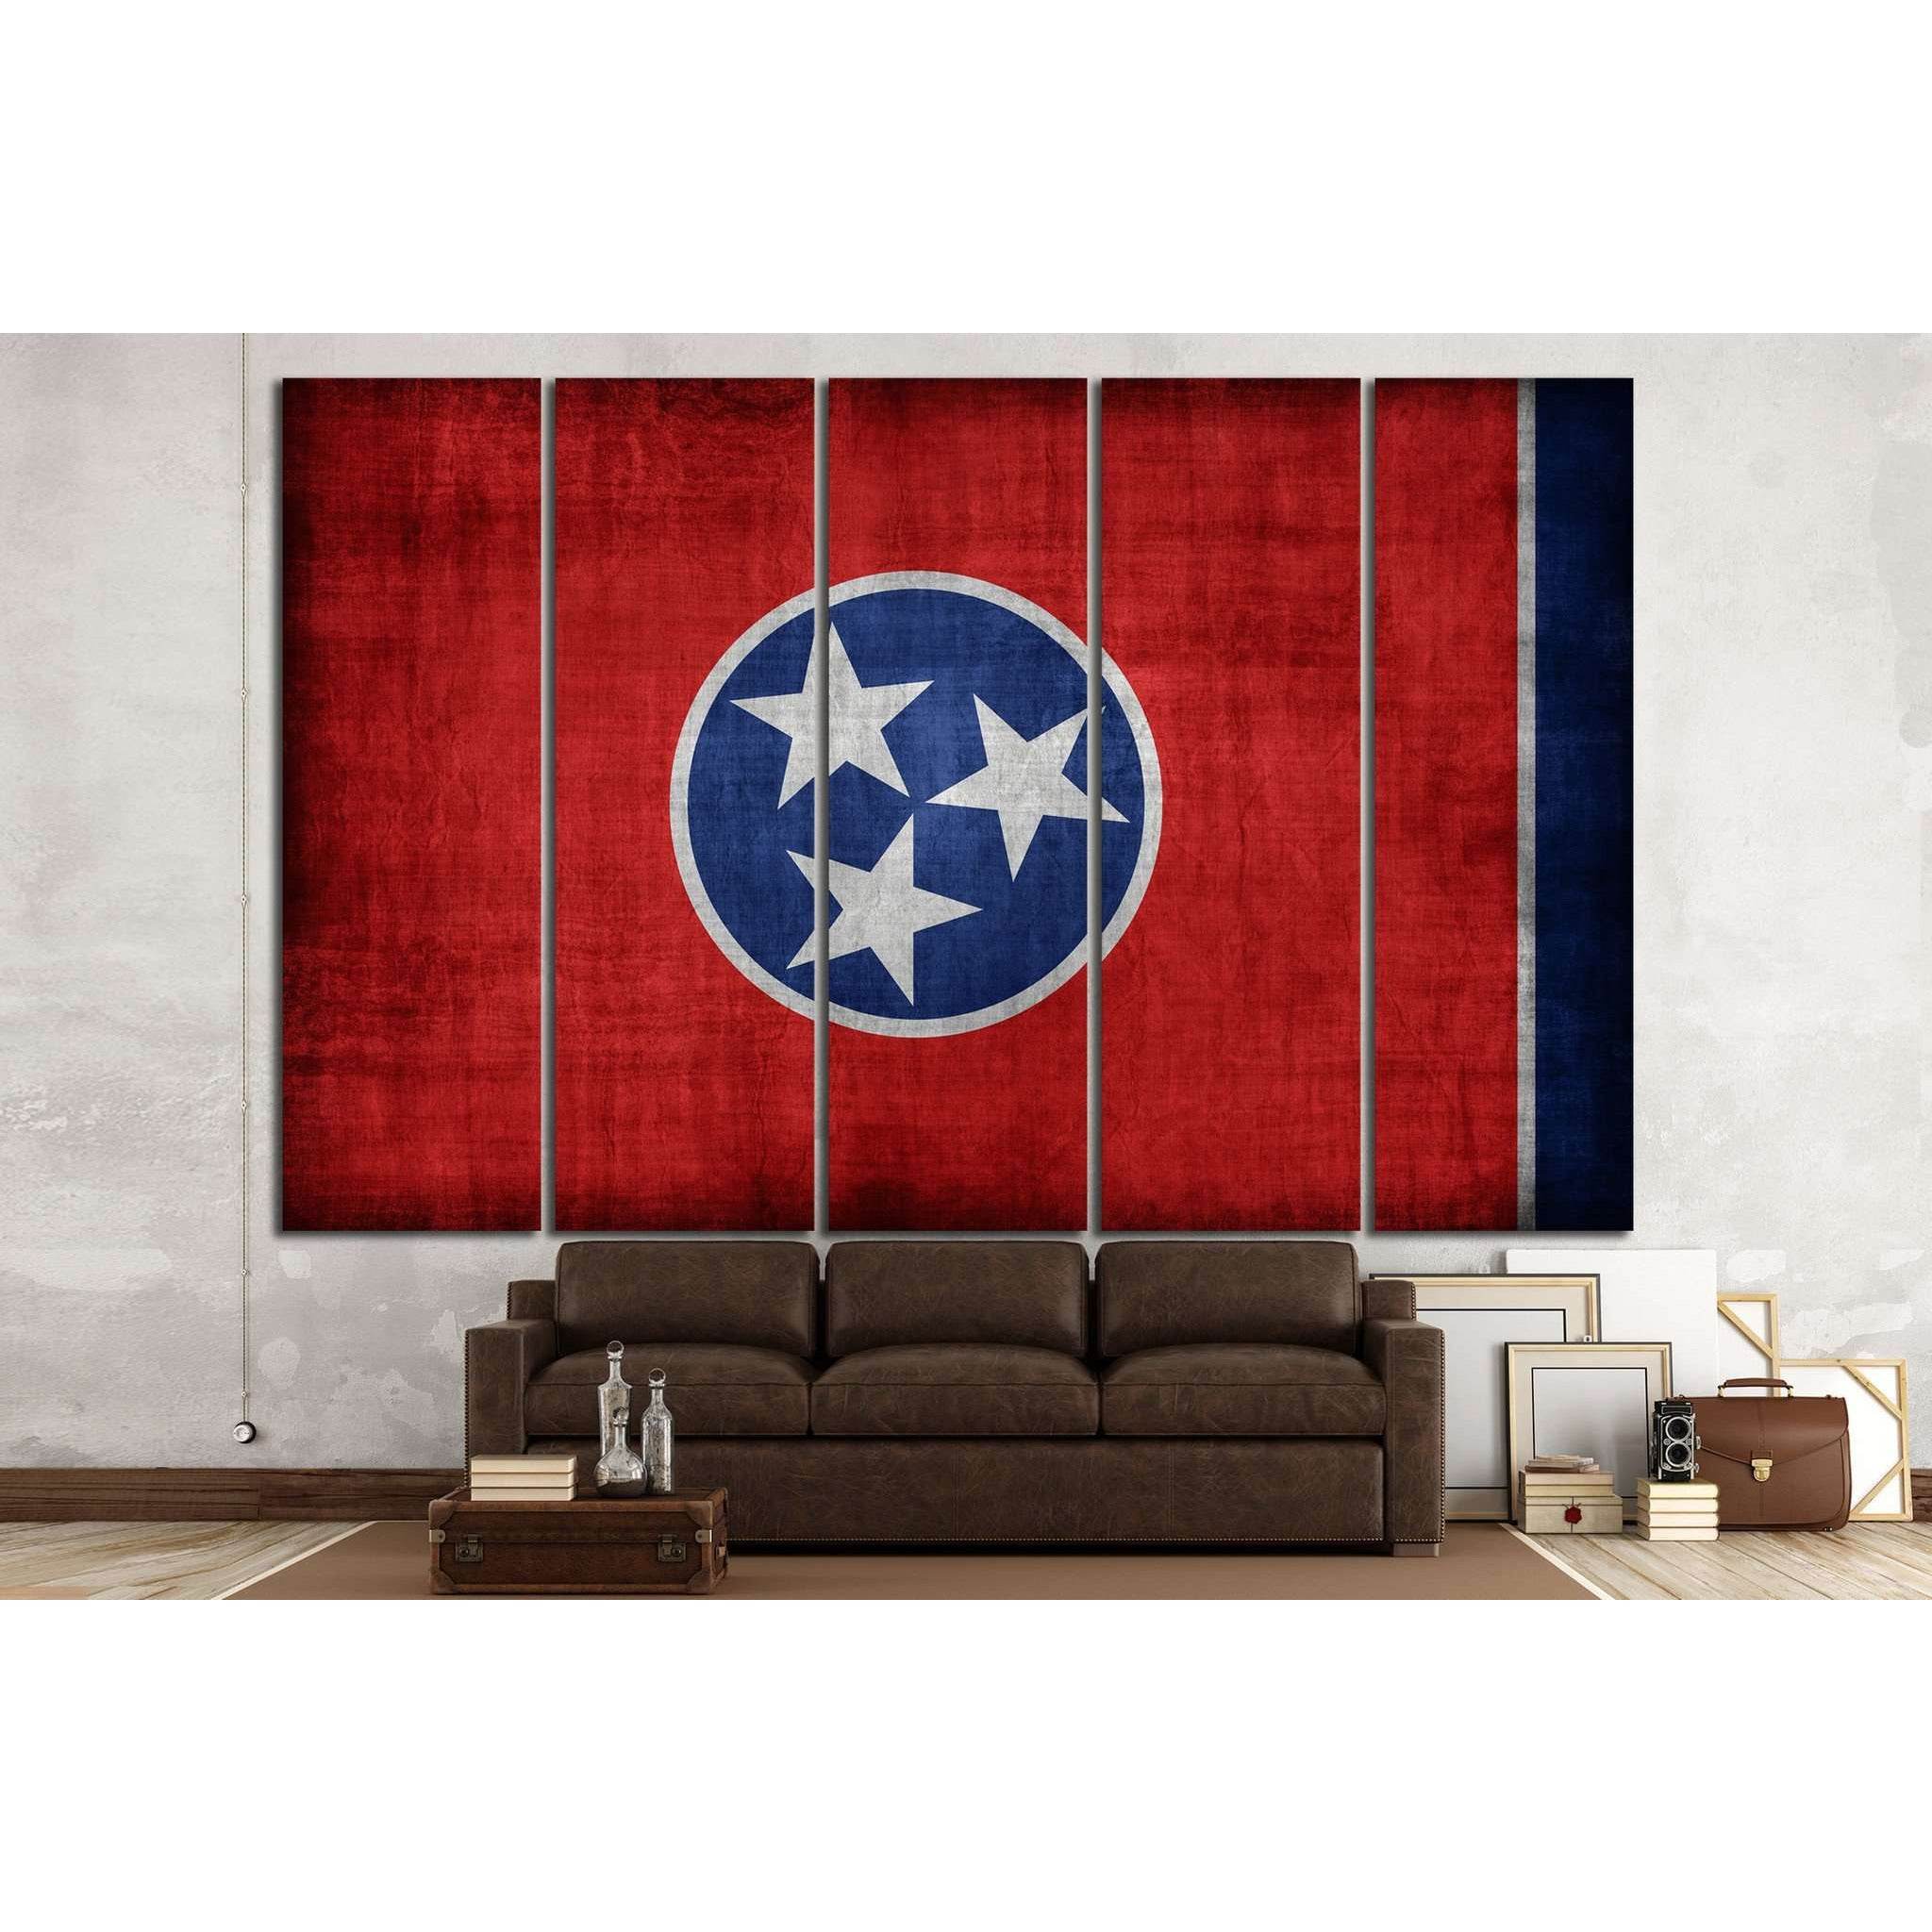 Tennessee flag №692 Ready to Hang Canvas Print